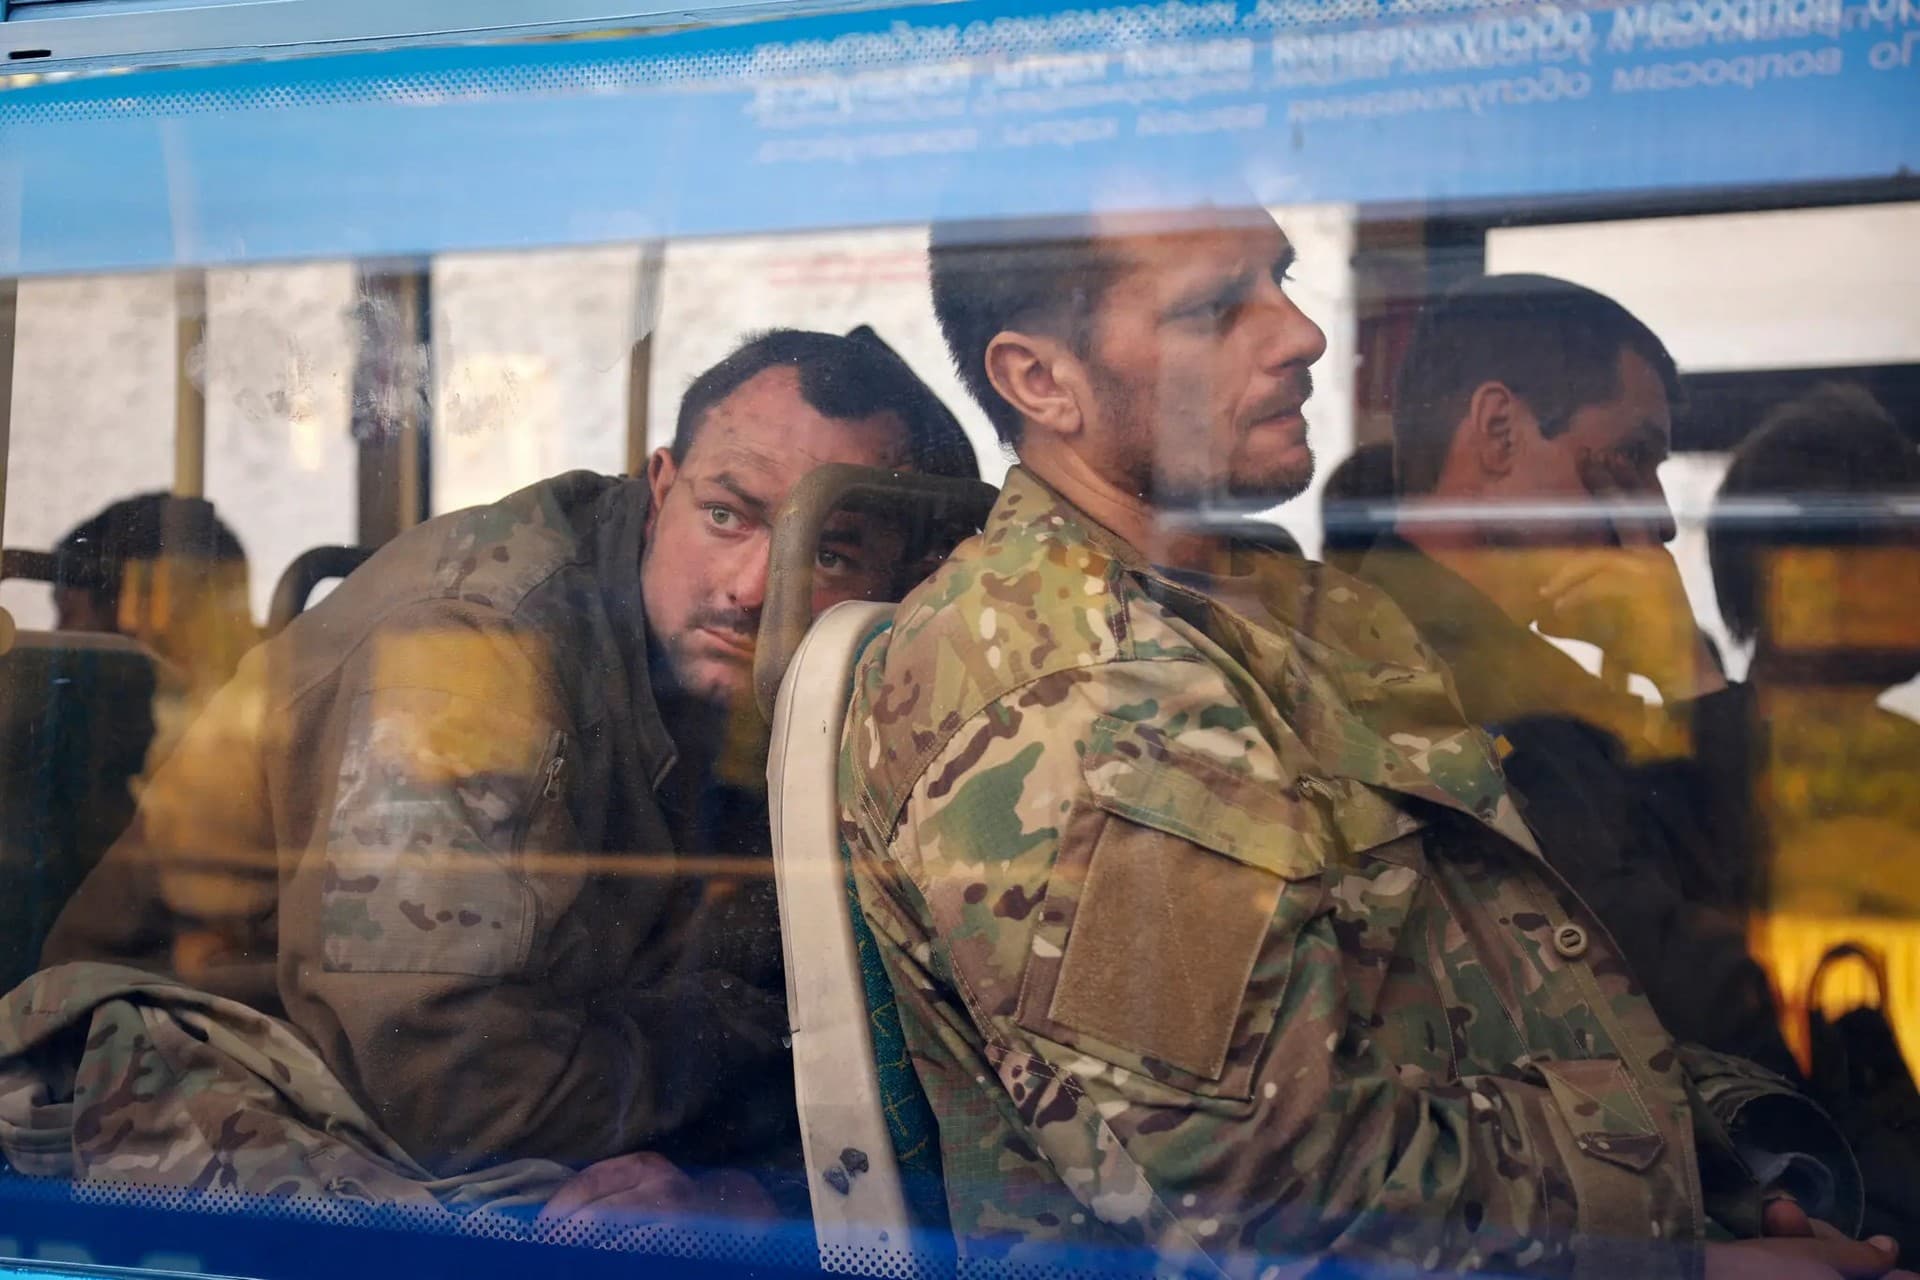 Ukrainian servicemen in a bus after they were evacuated from Mariupol’s besieged Azovstal steel plant on Tuesday